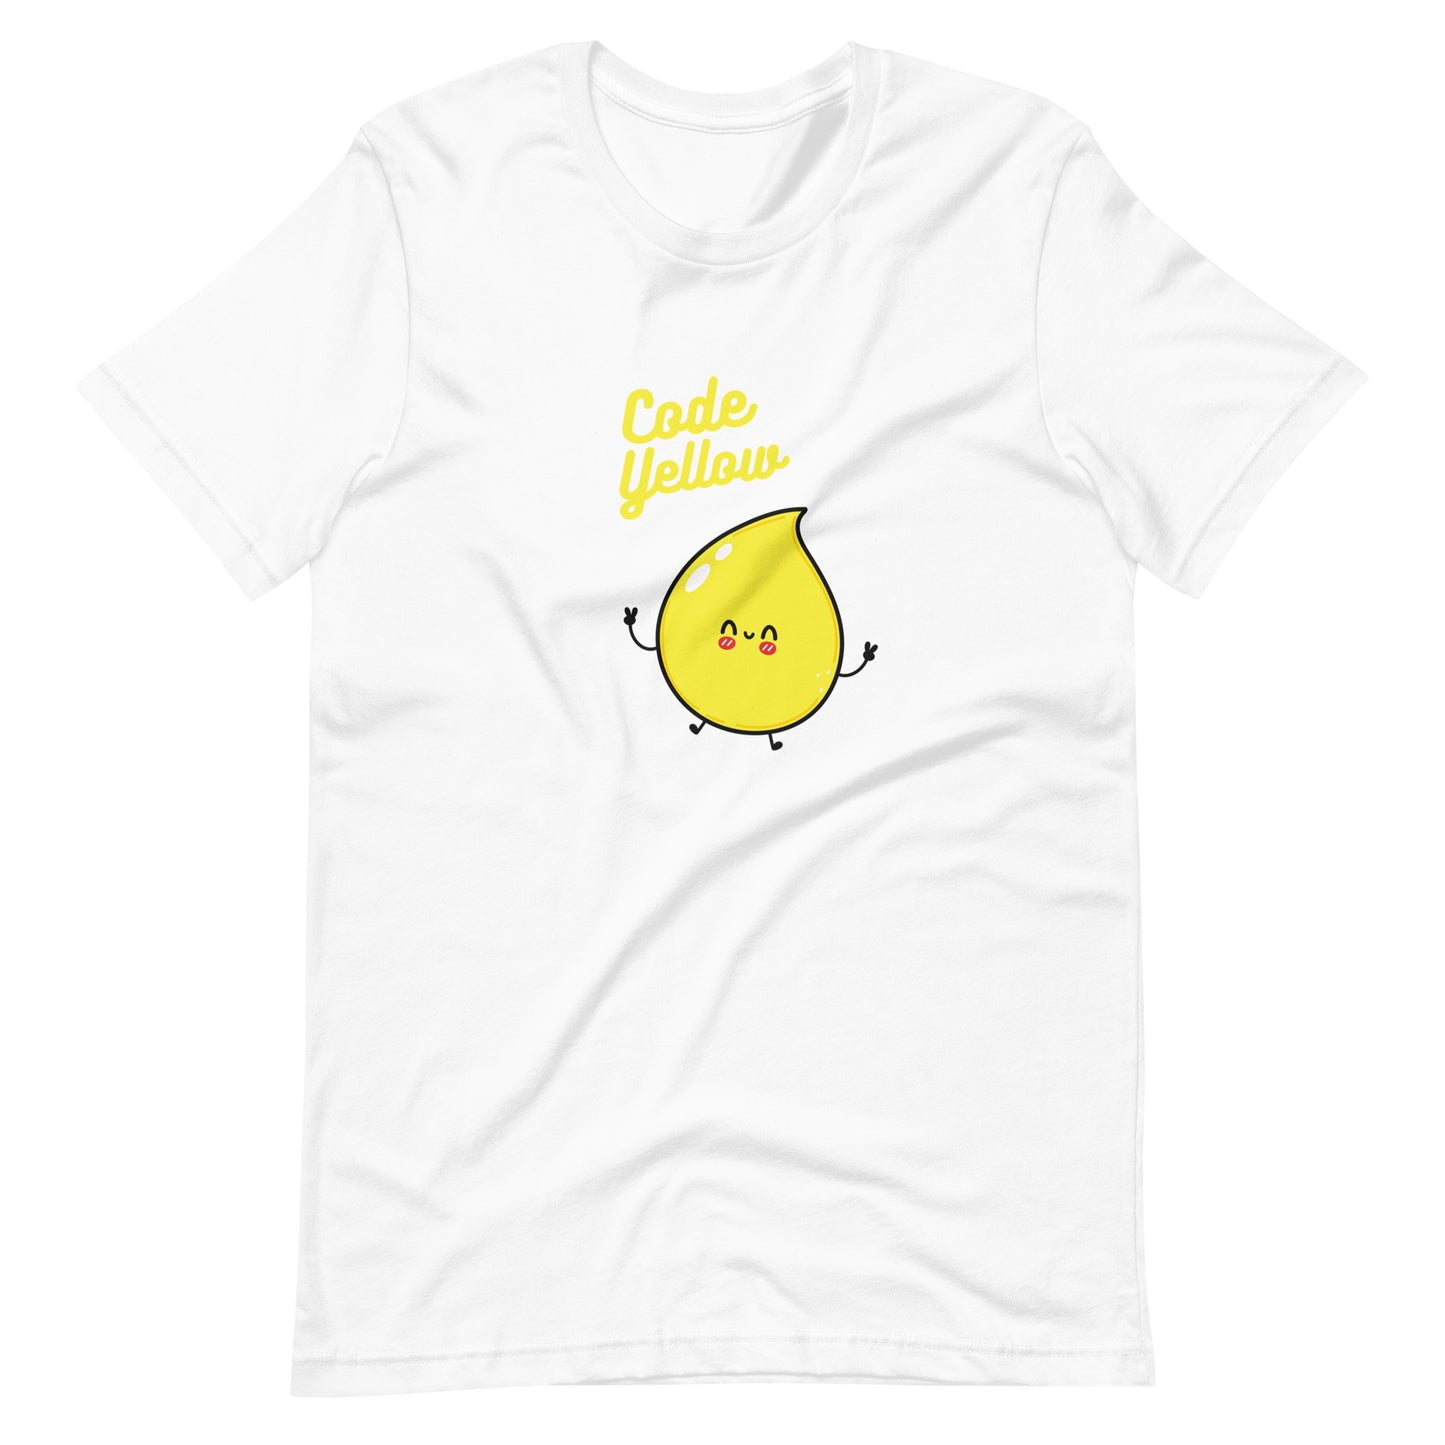 Graphic Tee, Code Yellow, CNA, Funny Doctor Shirt, Medical Student, Funny Nurse Shirt, Funny Resident Shirt, Doctor, Physician, Resident, Nurse, PA, NP, Medical Student